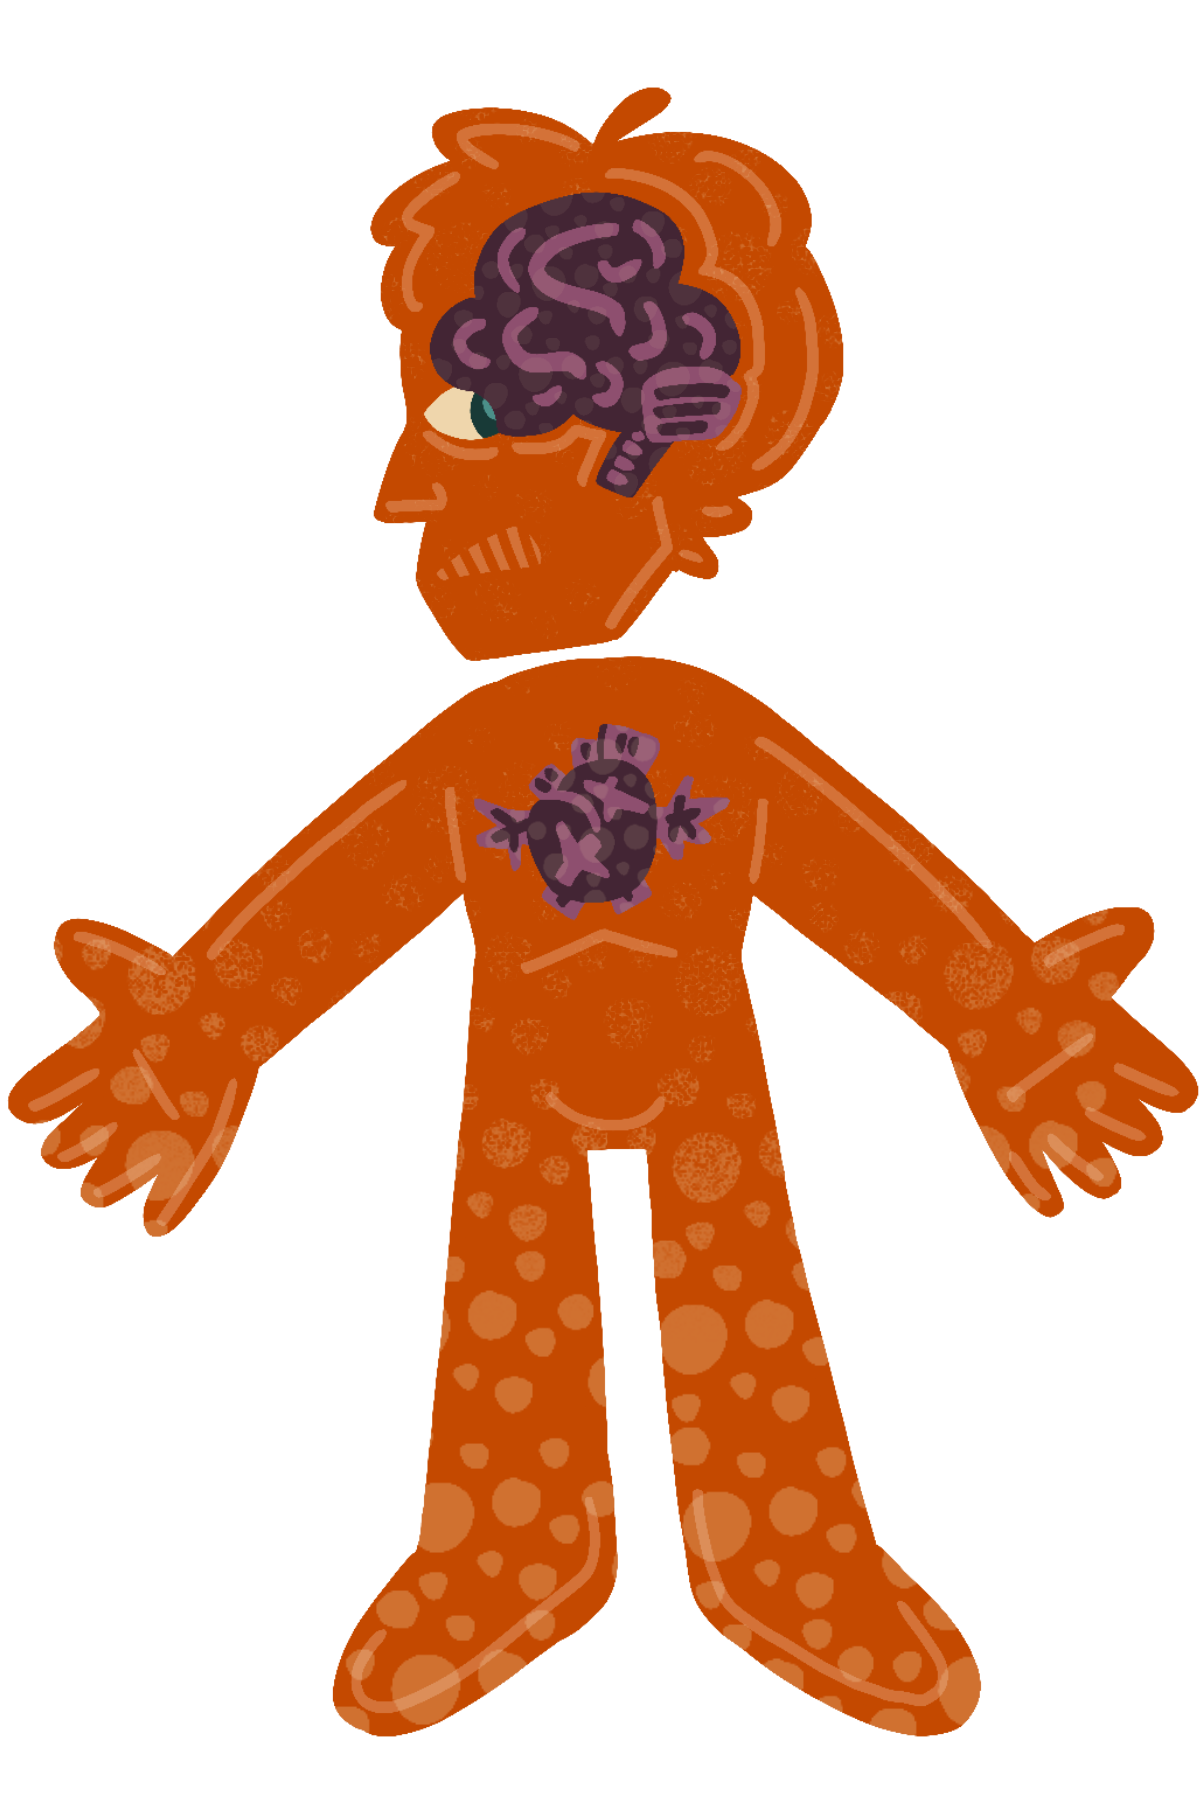 A orange silhouette of my body drawn in a cartoon style,the eyes, brain, and heart are drawn in purple.